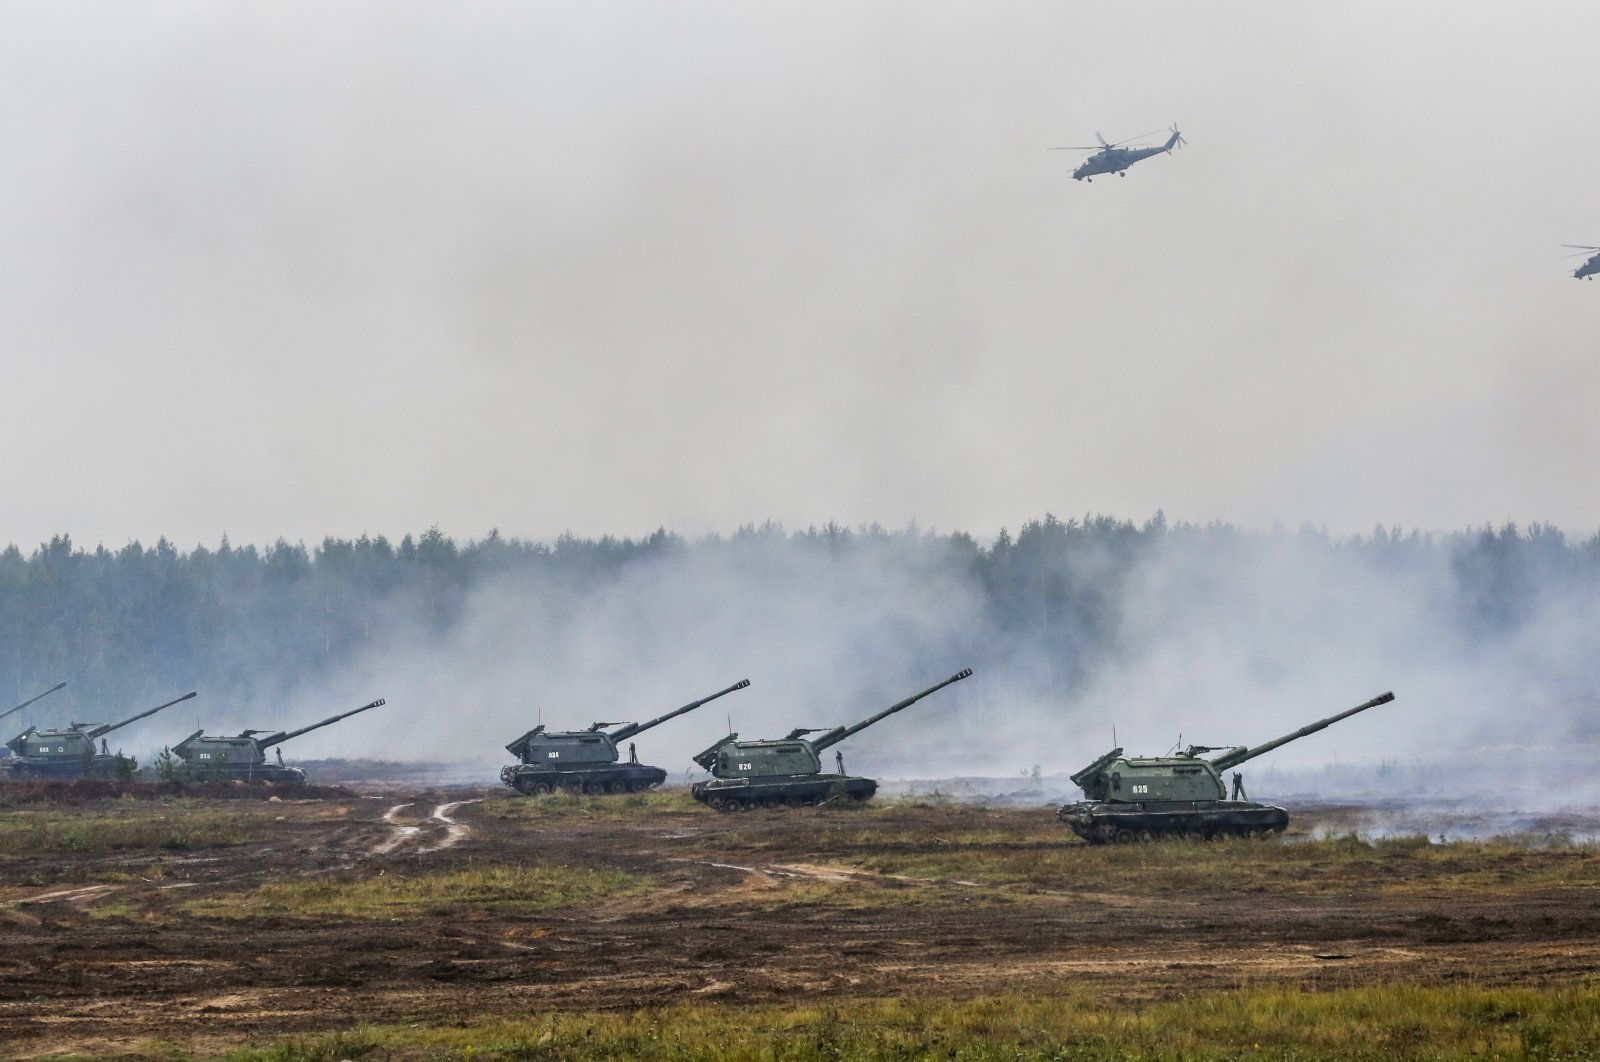 Belarusian and Russian troops take part in the Zapad (West) 2017 Russia-Belarus military exercises at the Borisovsky range in Borisov, Belarus, Wednesday, Sept. 20, 2017. (AP File Photo)